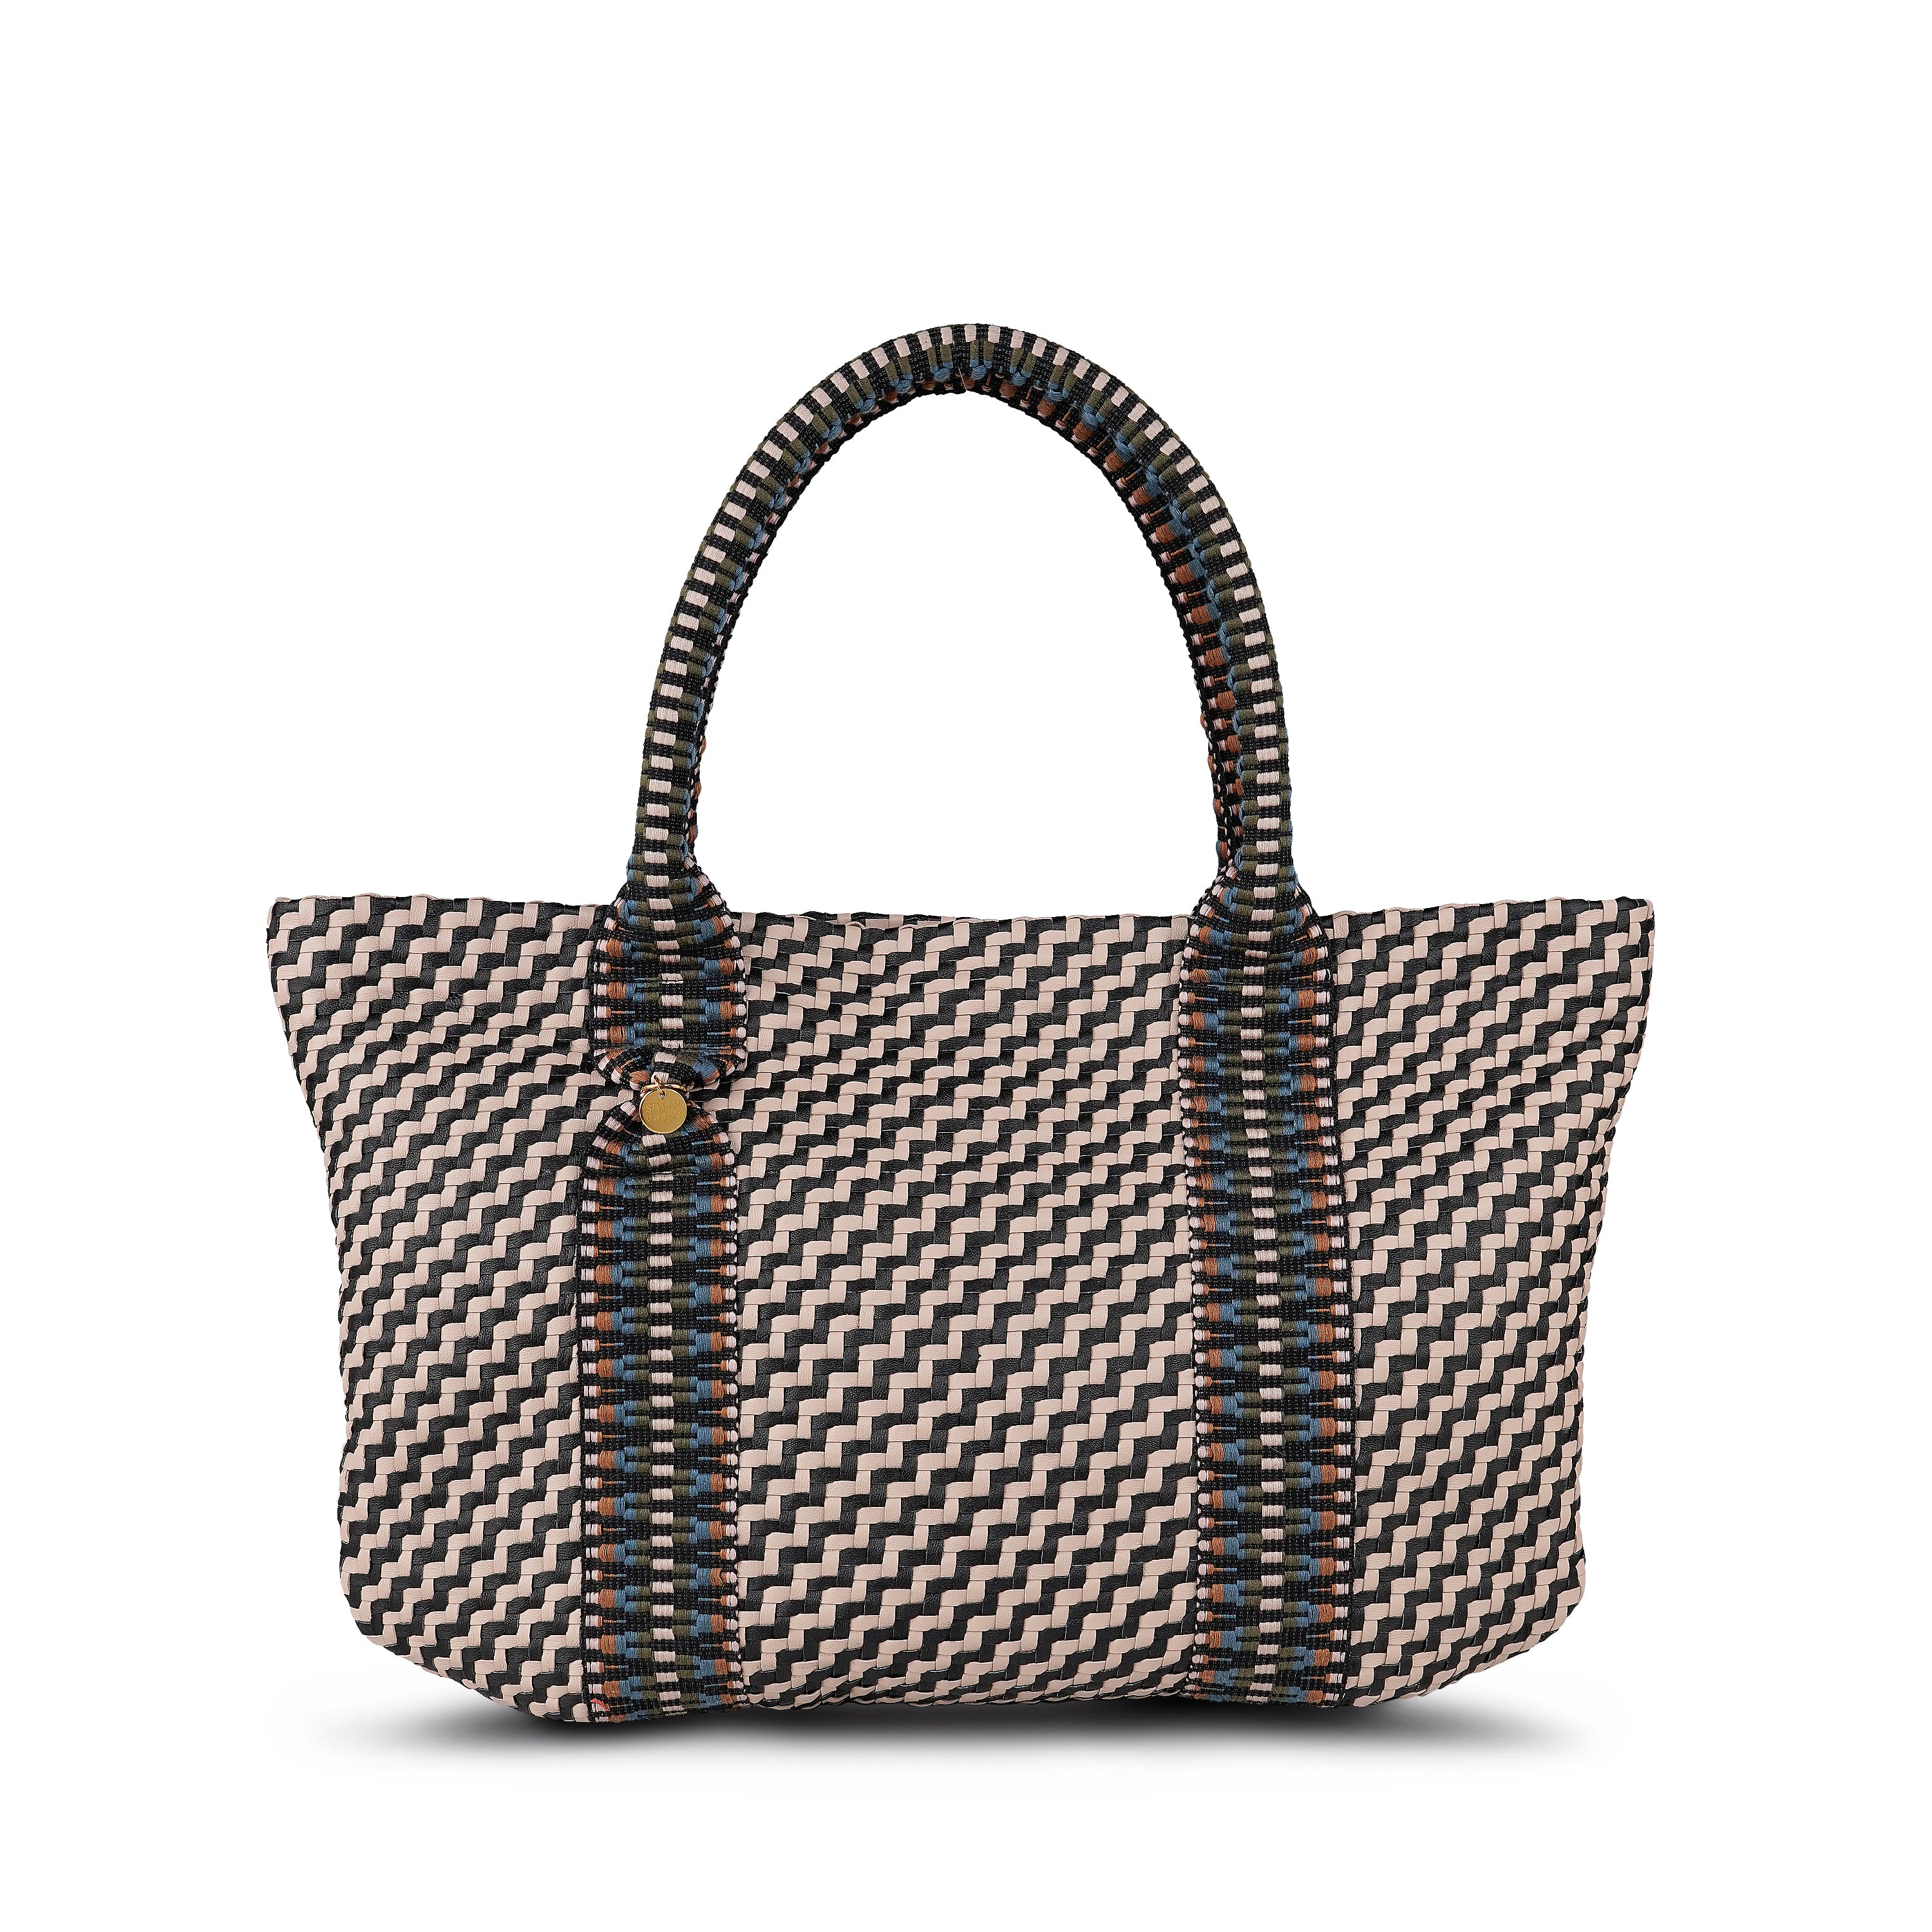 Misool Hand Woven Leather Tote Bag in MOCHA by STELAR